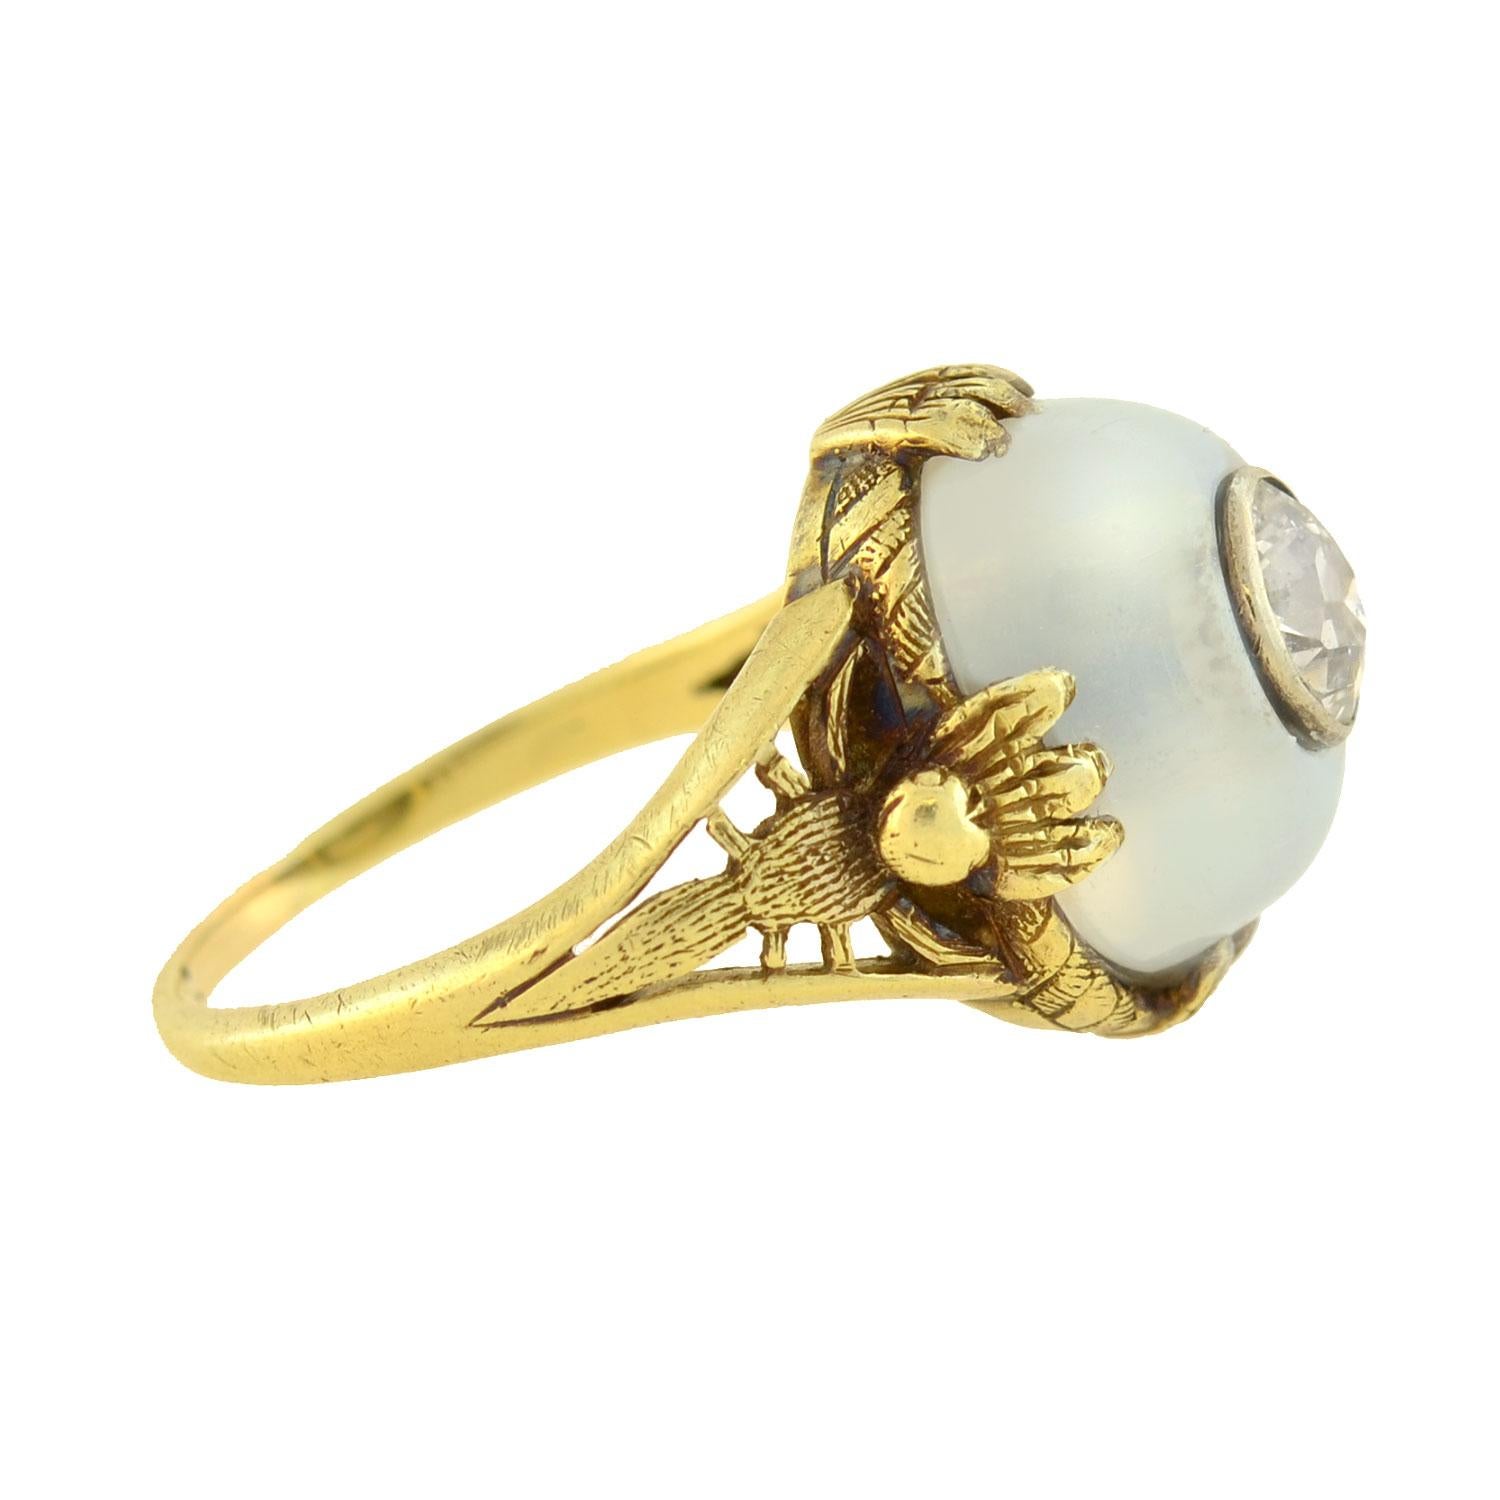 An incredible moonstone and diamond ring from the Art Nouveau (ca1900) era! Crafted in 14kt yellow gold, this fantastic and unusual piece has an artistic wirework setting which holds a large moonstone cabochon at its center. The oval shaped